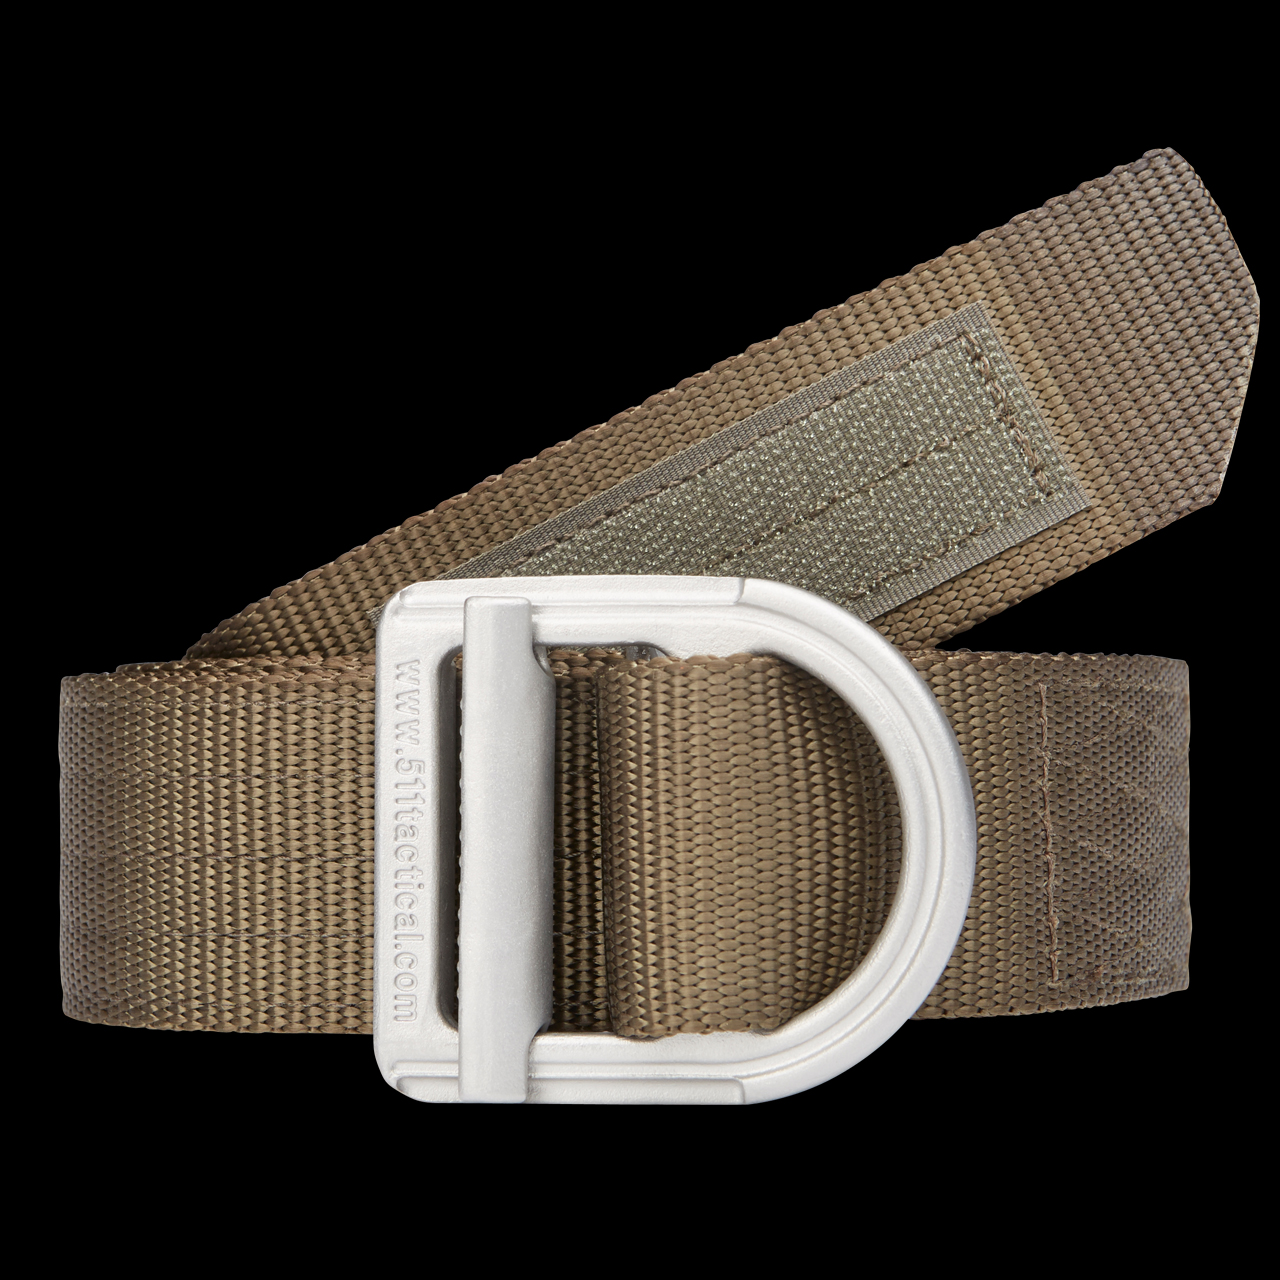 5.11 Tactical Men's Military Trainer Belt, Fade and Rip Resistant, Nylon  Mesh, Style 59409